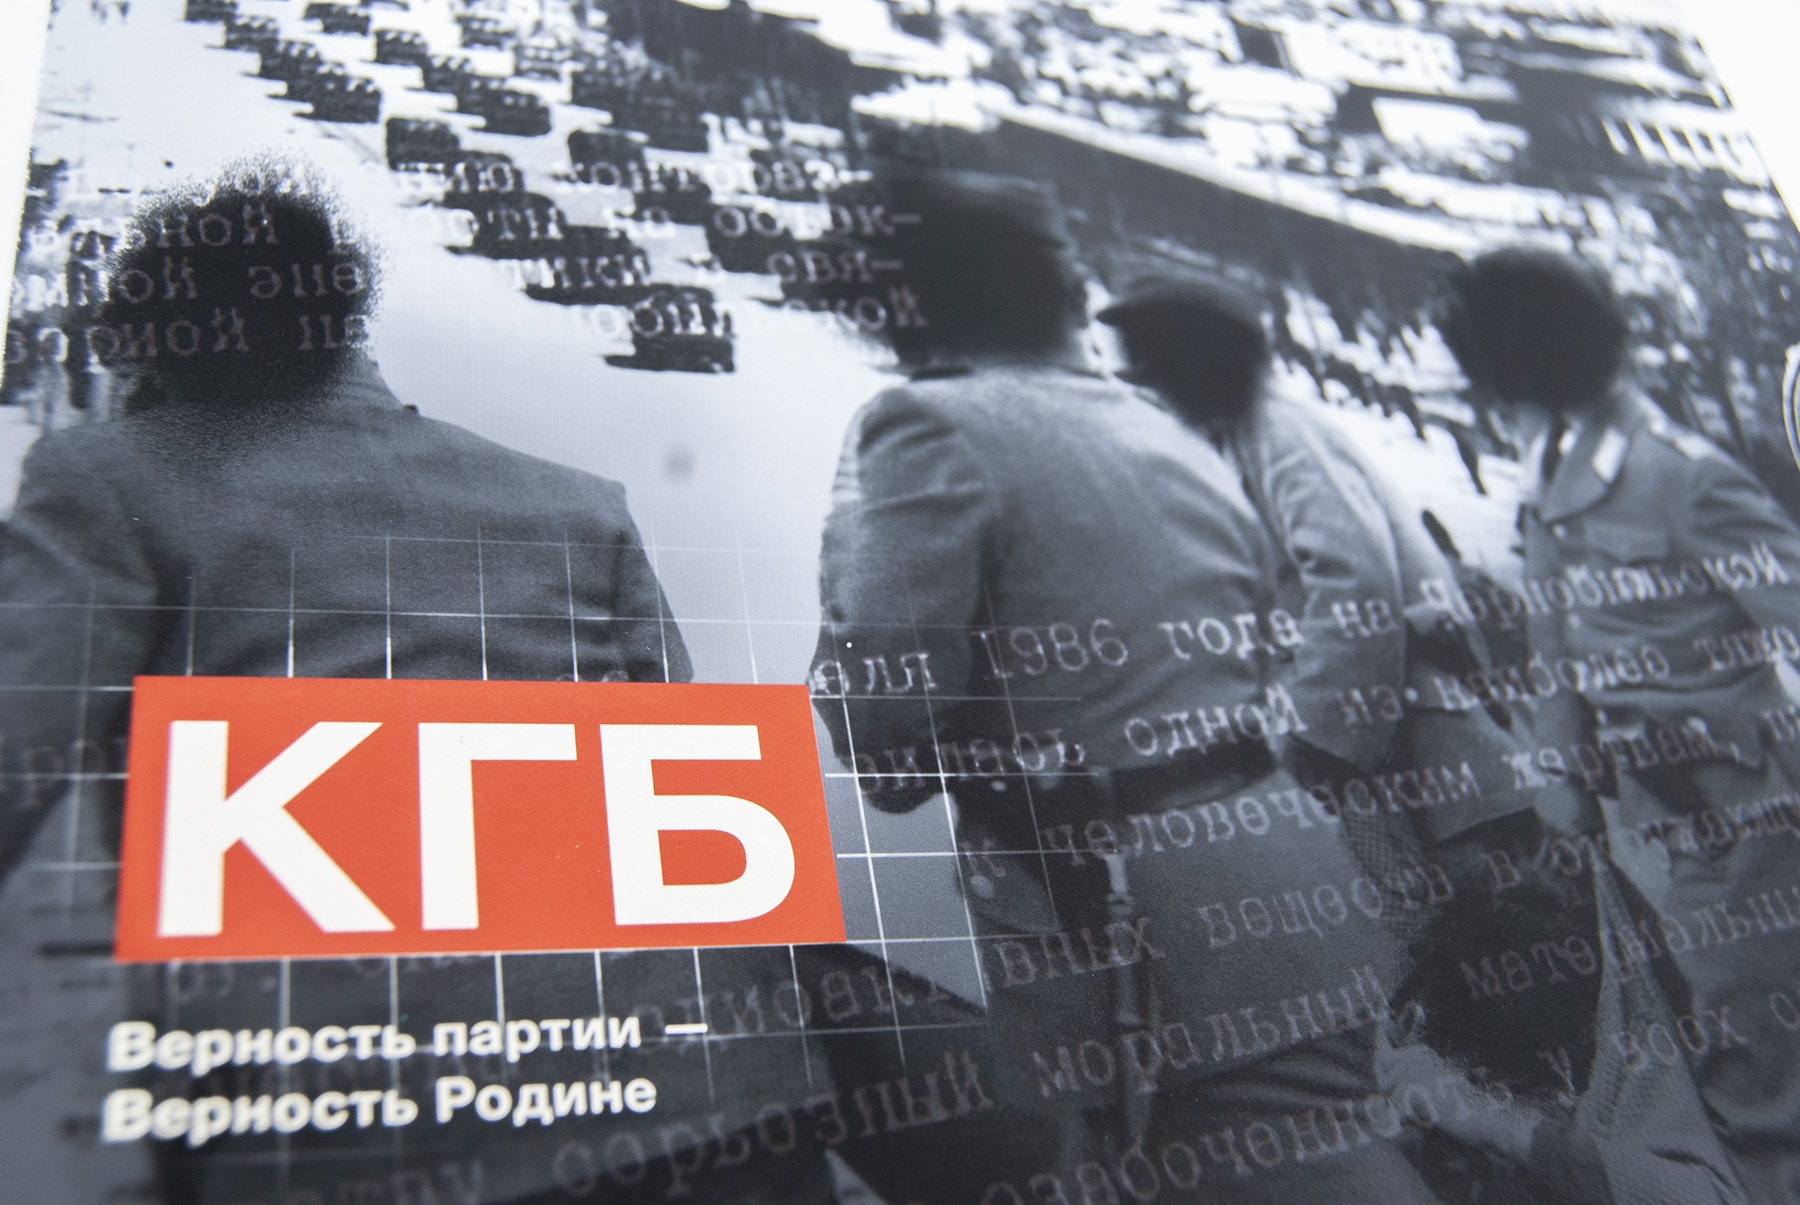 Detail image of the KGB page